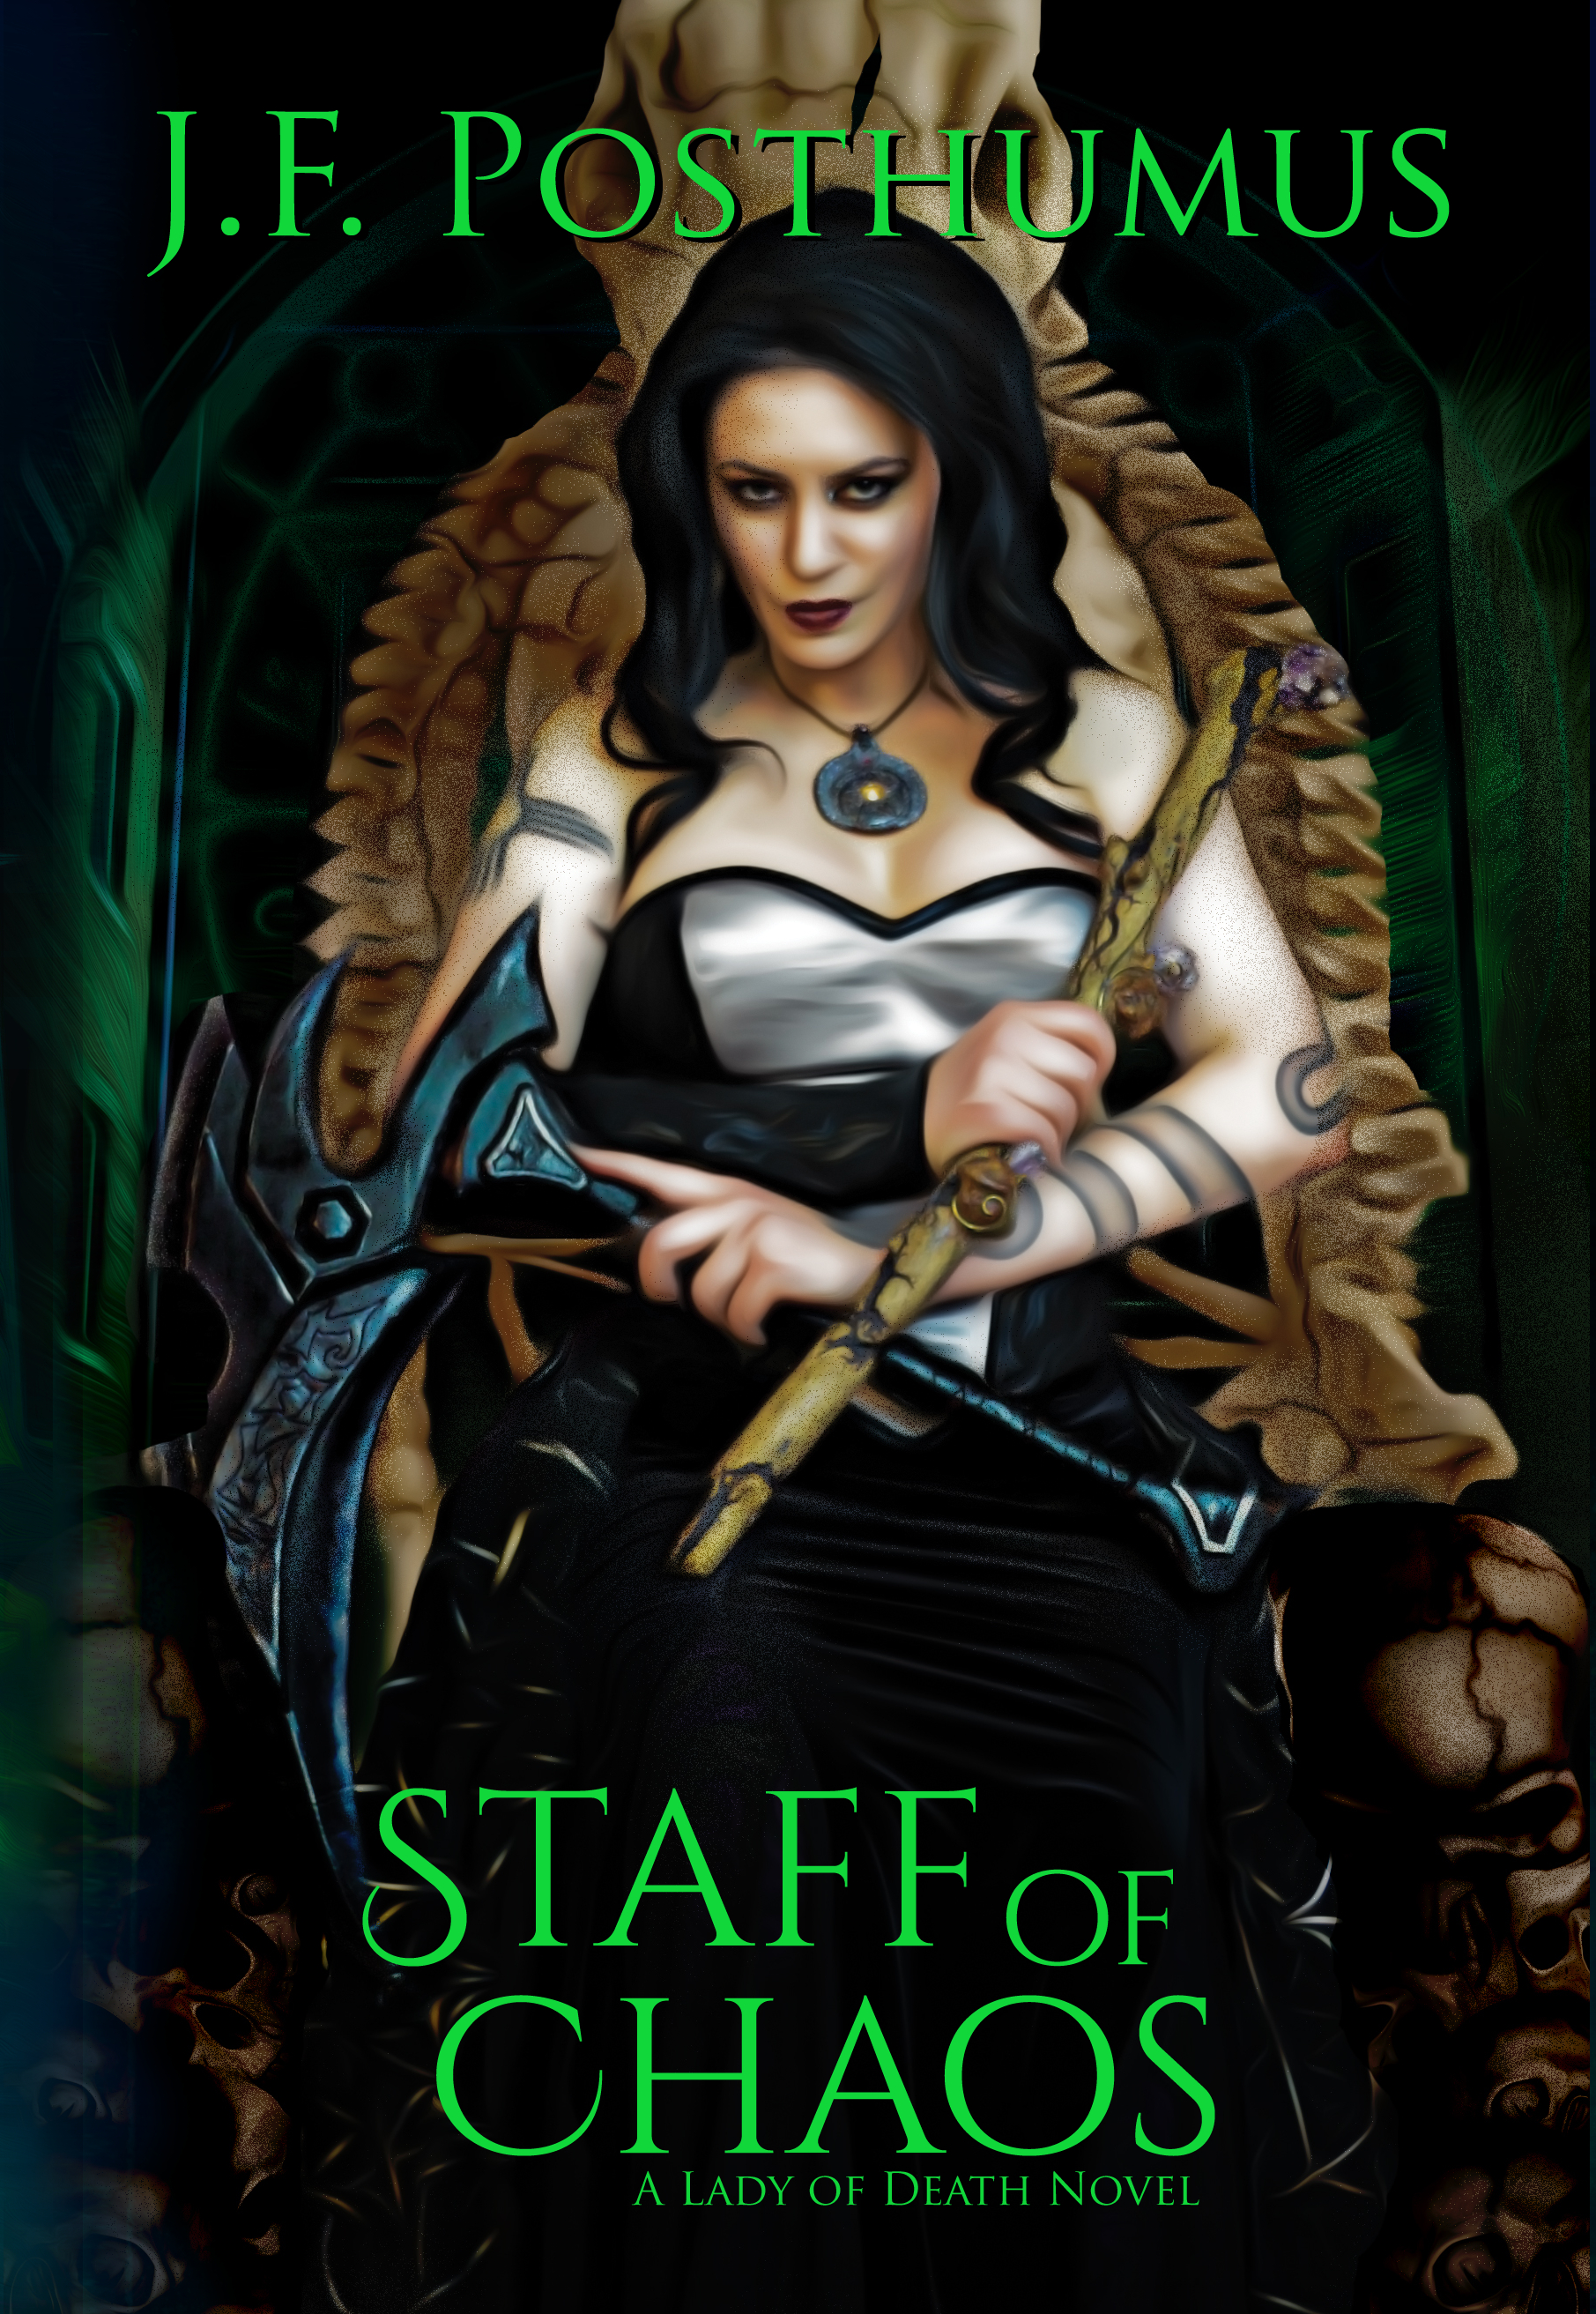 Are you ready for something new, shiny, and awesome? Staff of Chaos is now available!